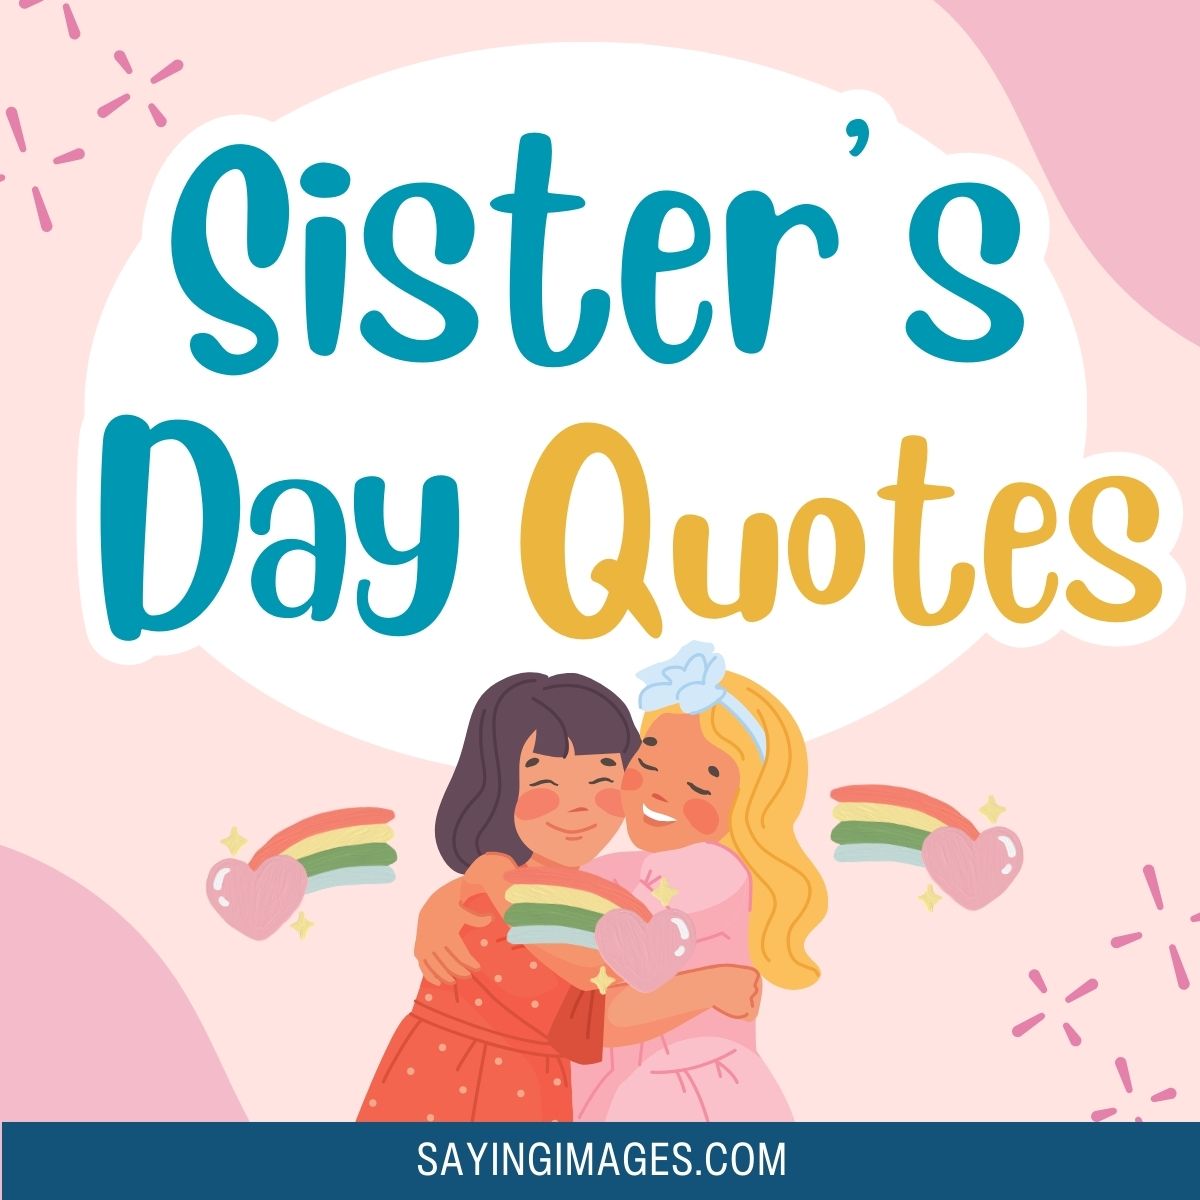 95 Happy Women's Day Quotes And Greetings